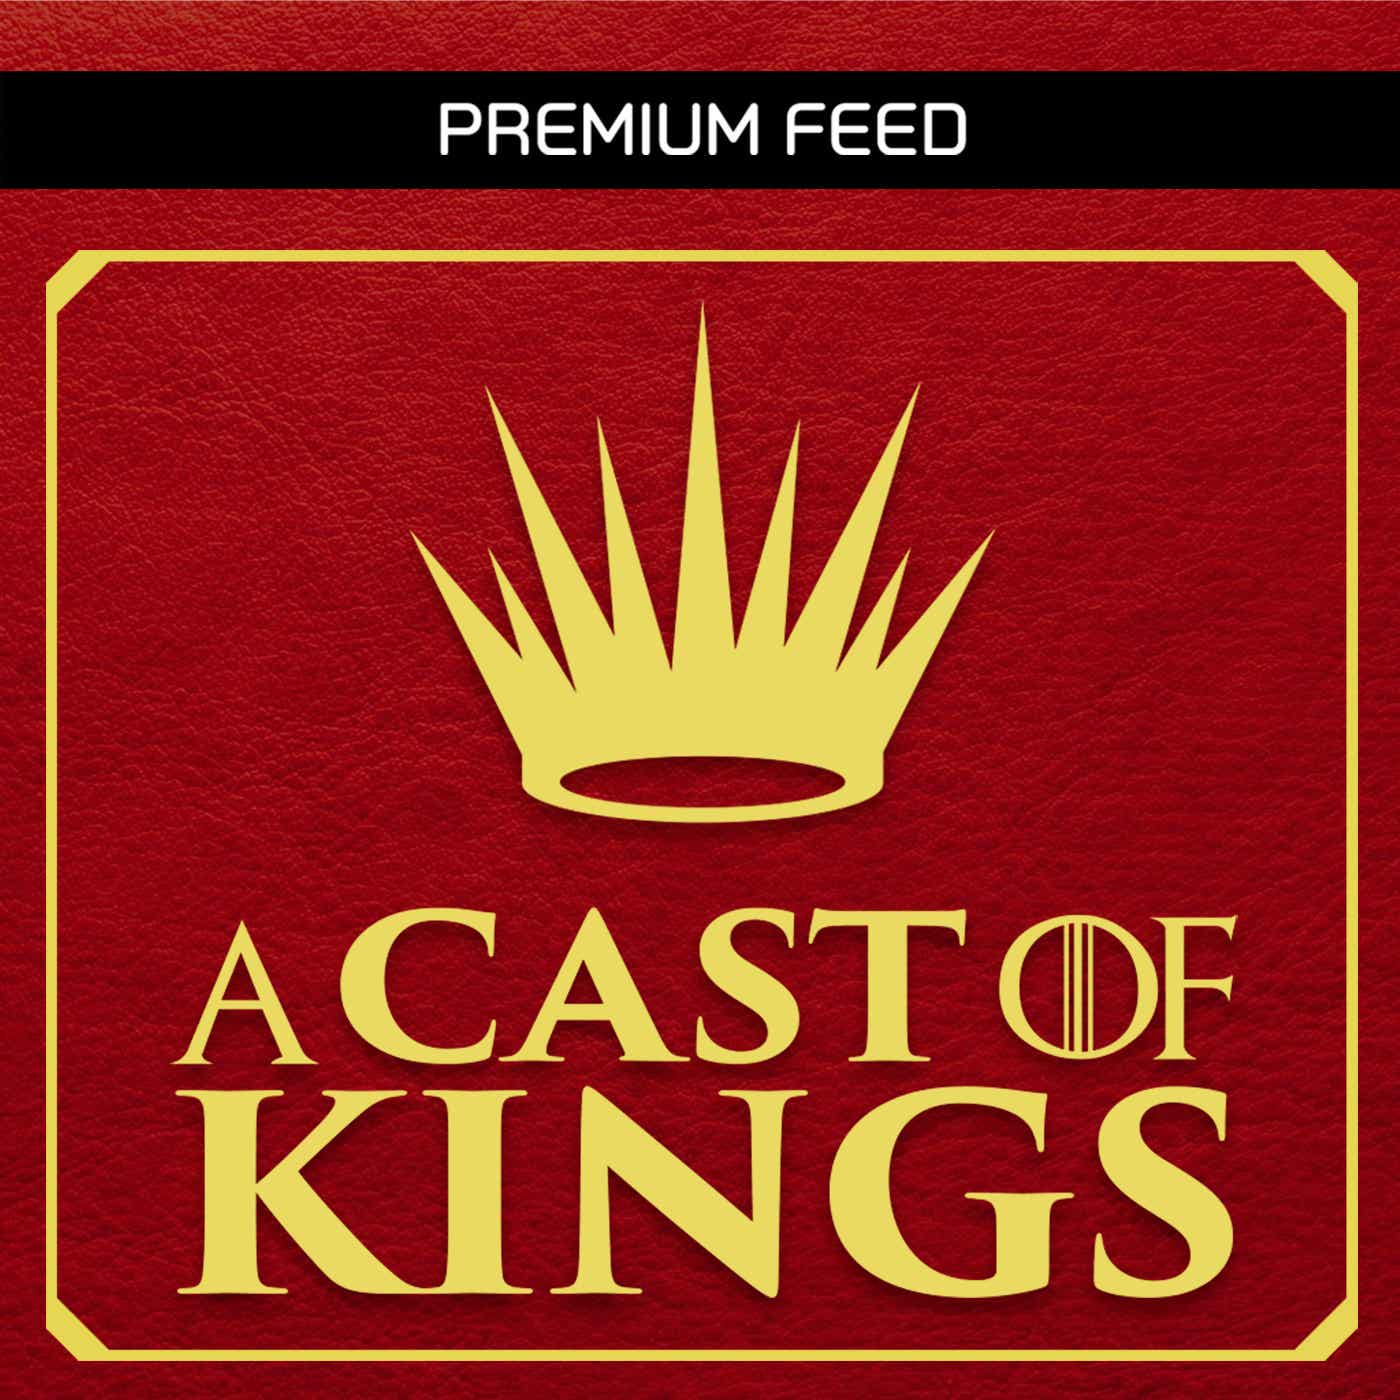 A Cast of Kings (Premium Feed) (private feed for sraust@gmail.com)